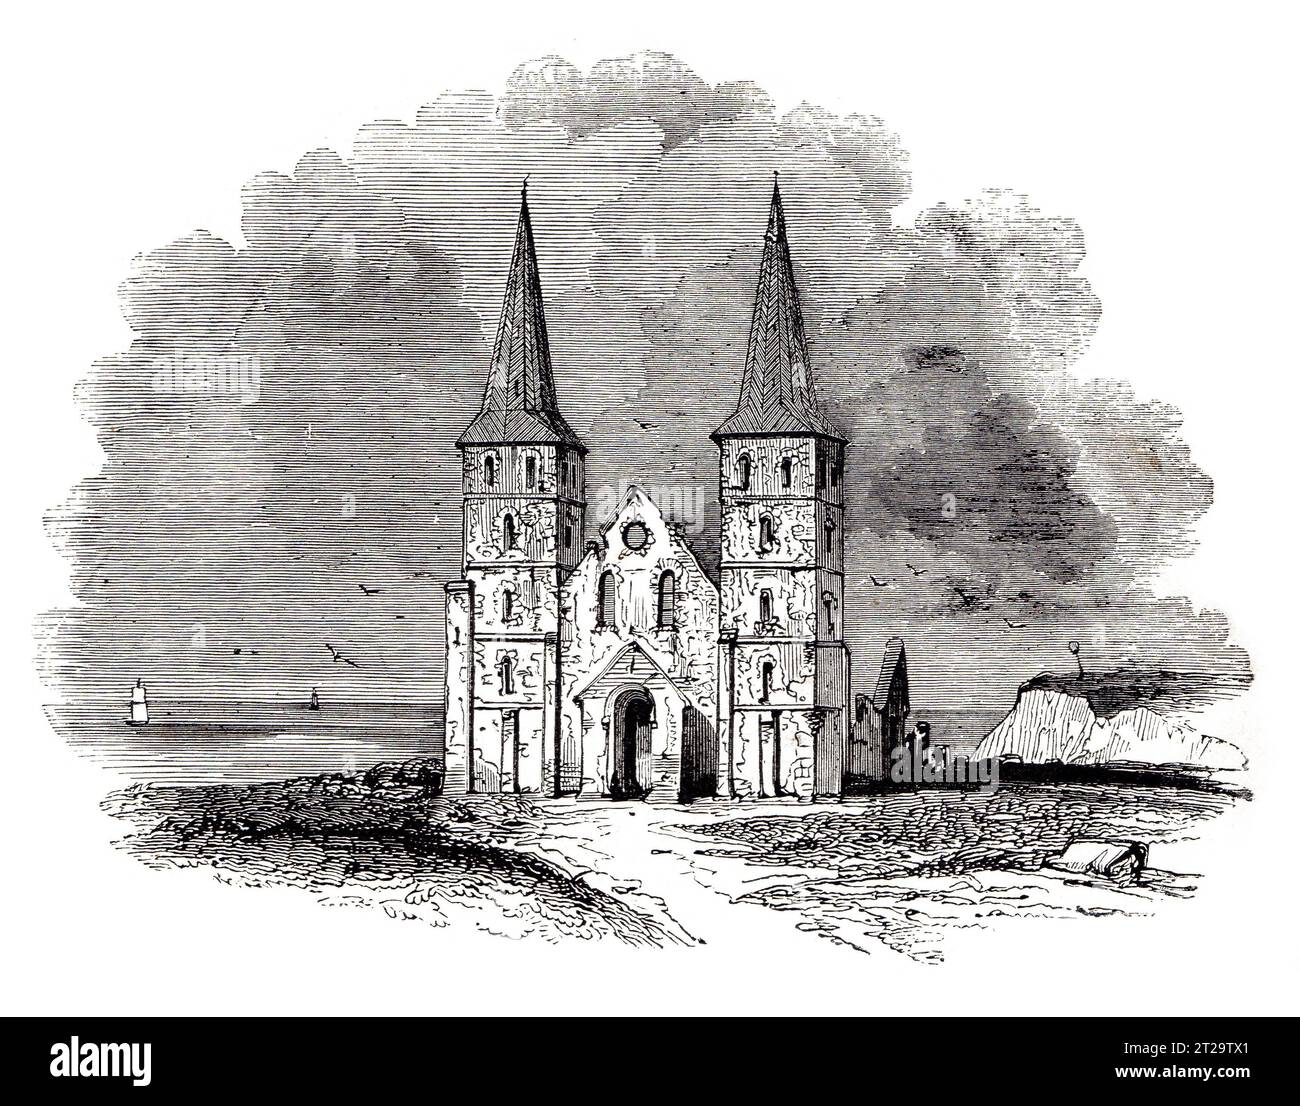 The ruins of Reculver Church in the 19th century. Black and White Illustration from the 'Old England' published by James Sangster in 1860. Stock Photo